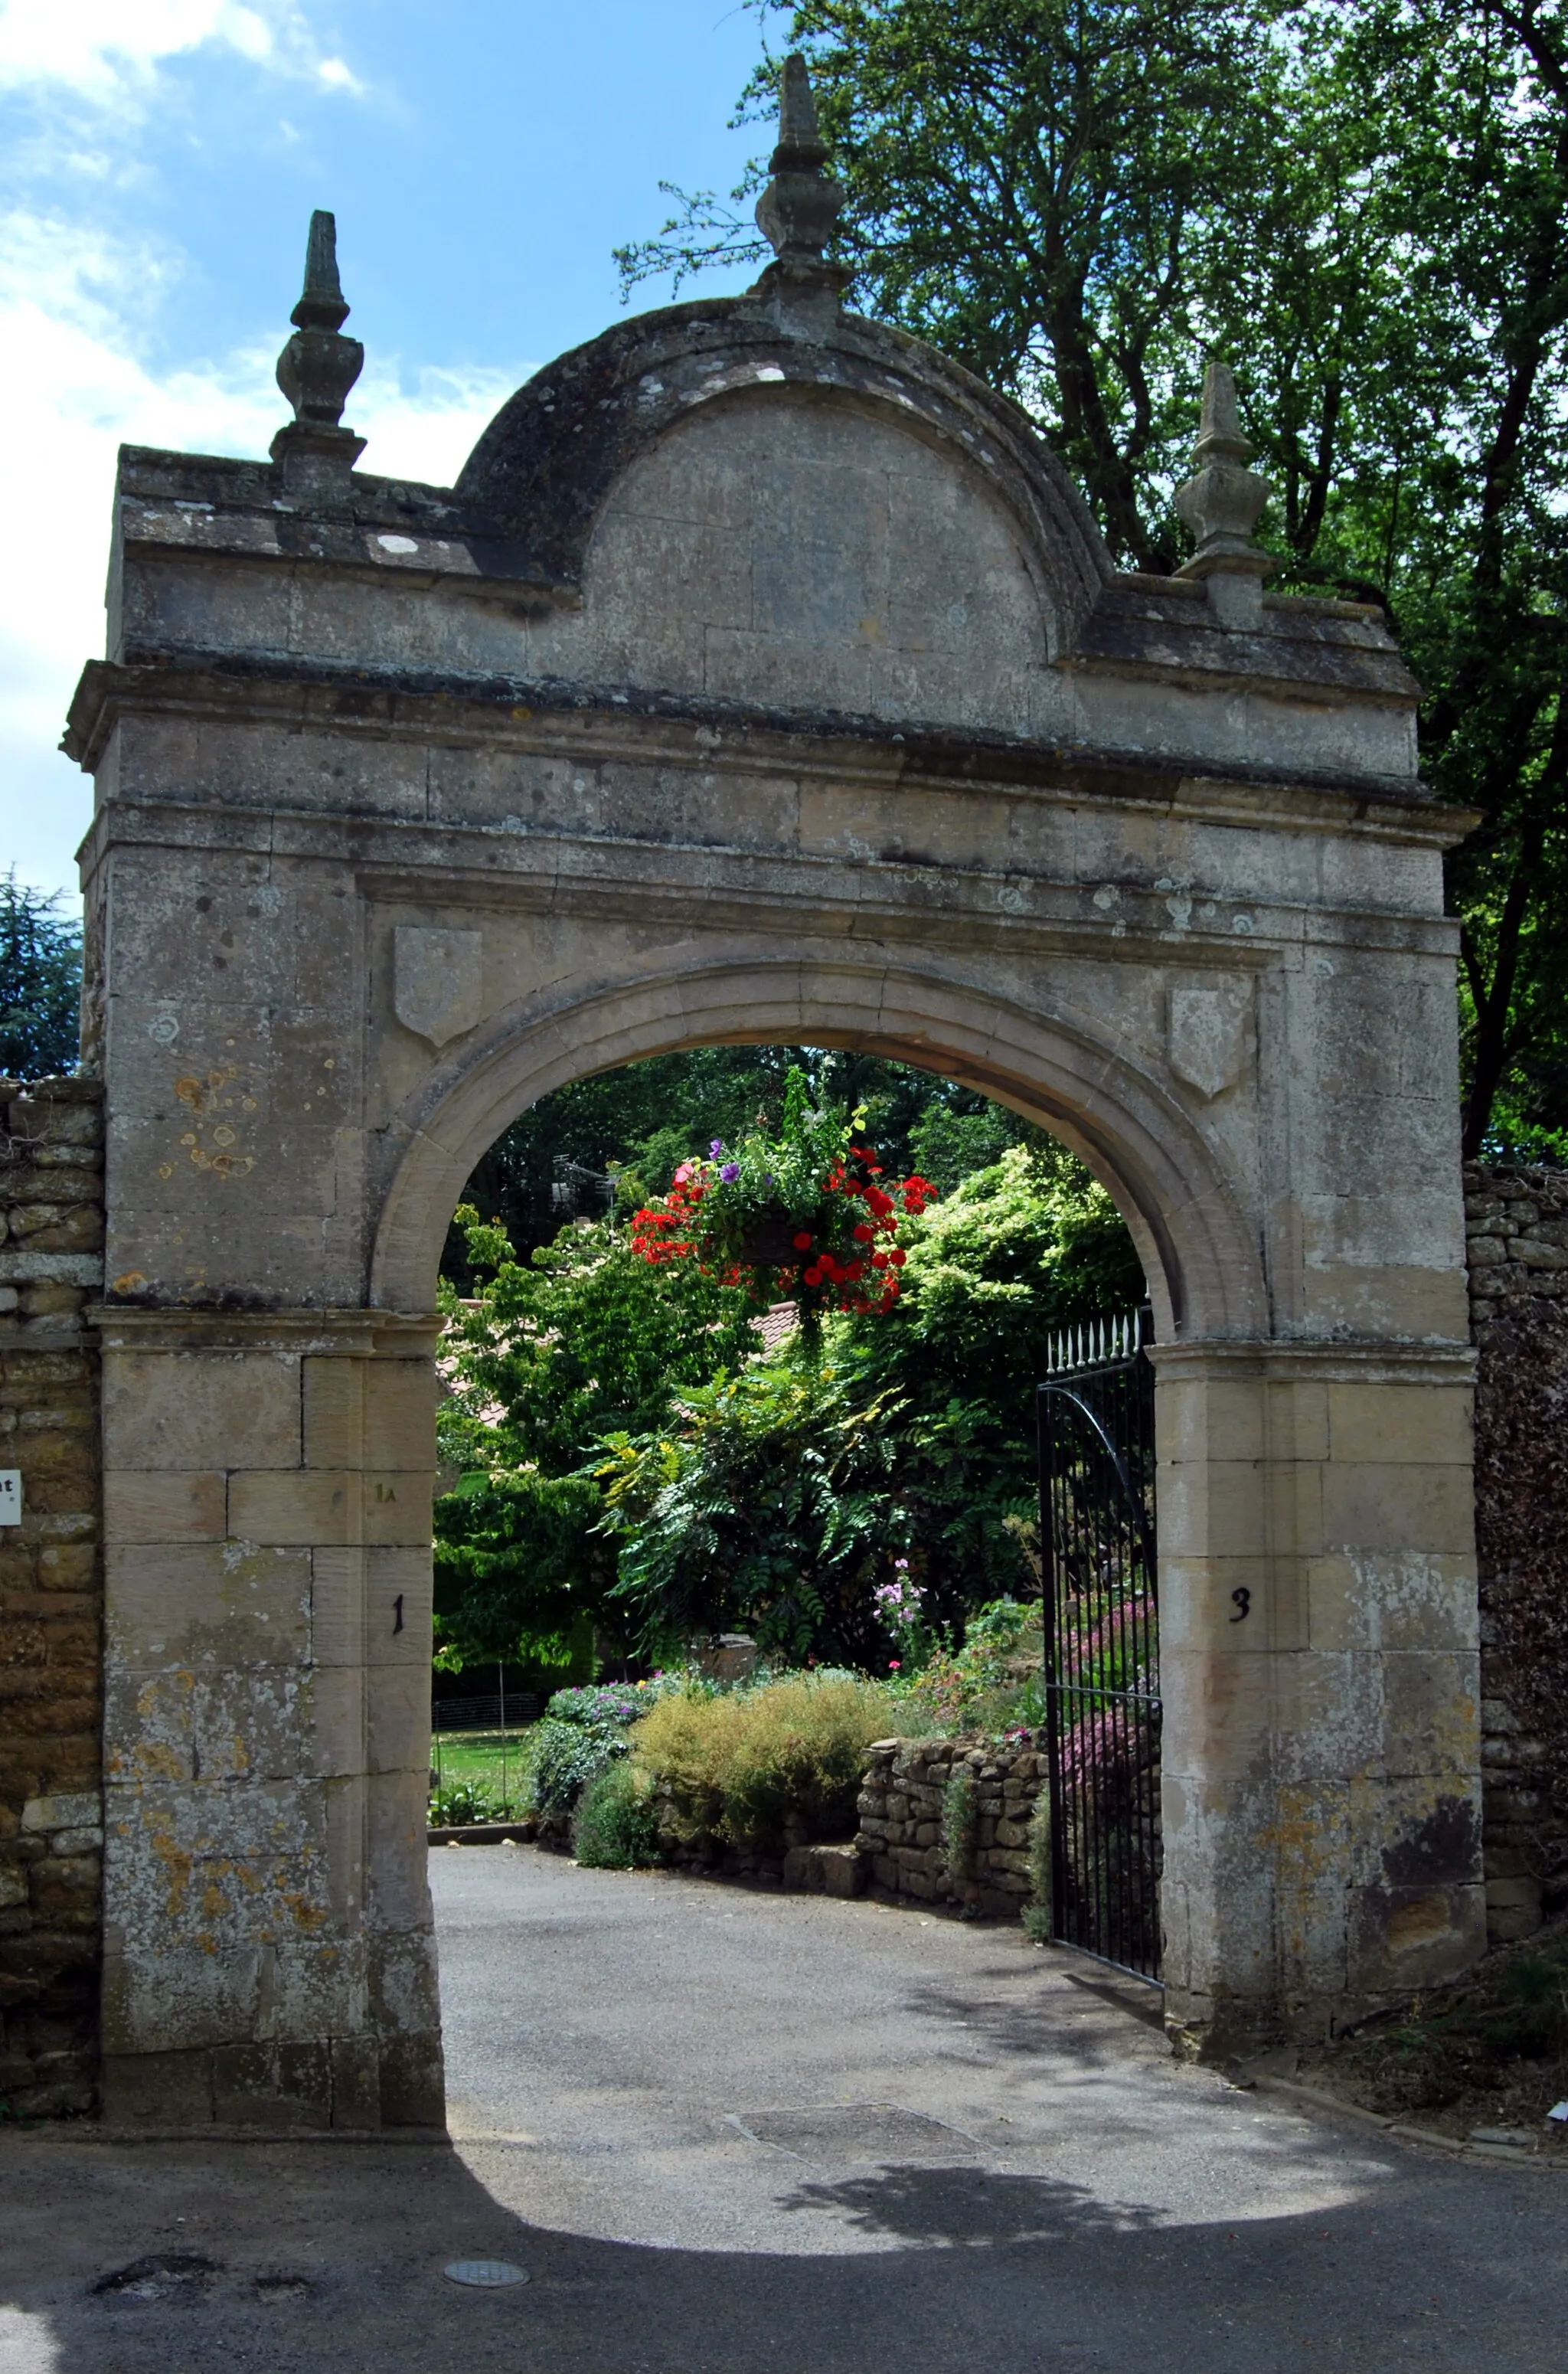 Photo showing: The gates to the original Manor House in Harlaxton,Lincolnshire